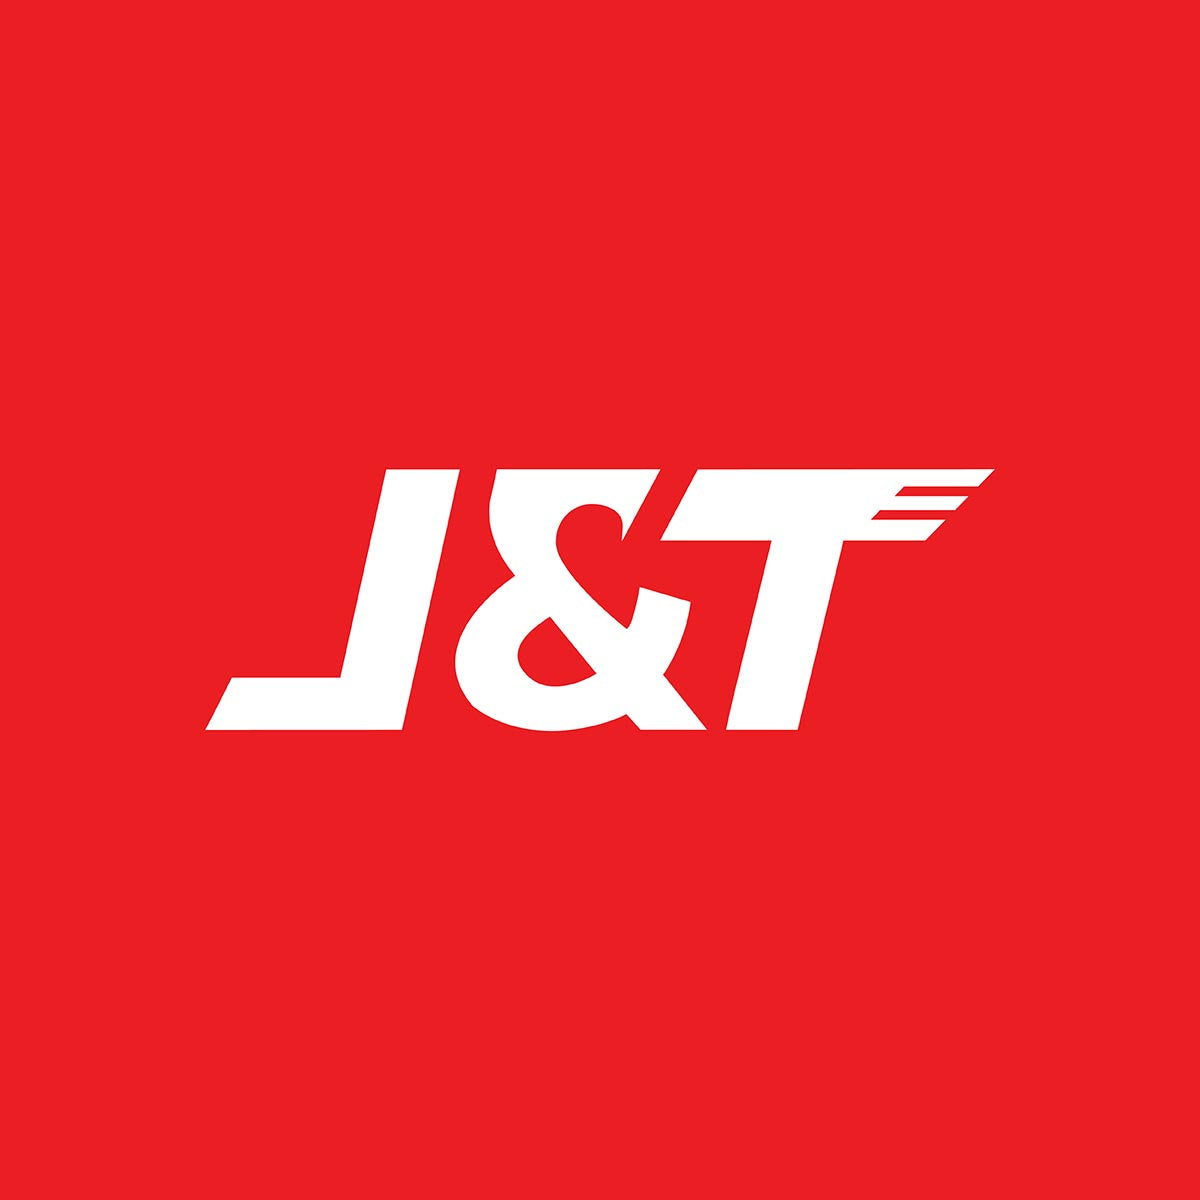 Hire Shopify Experts to integrate J&T Express Malaysia app into a Shopify store